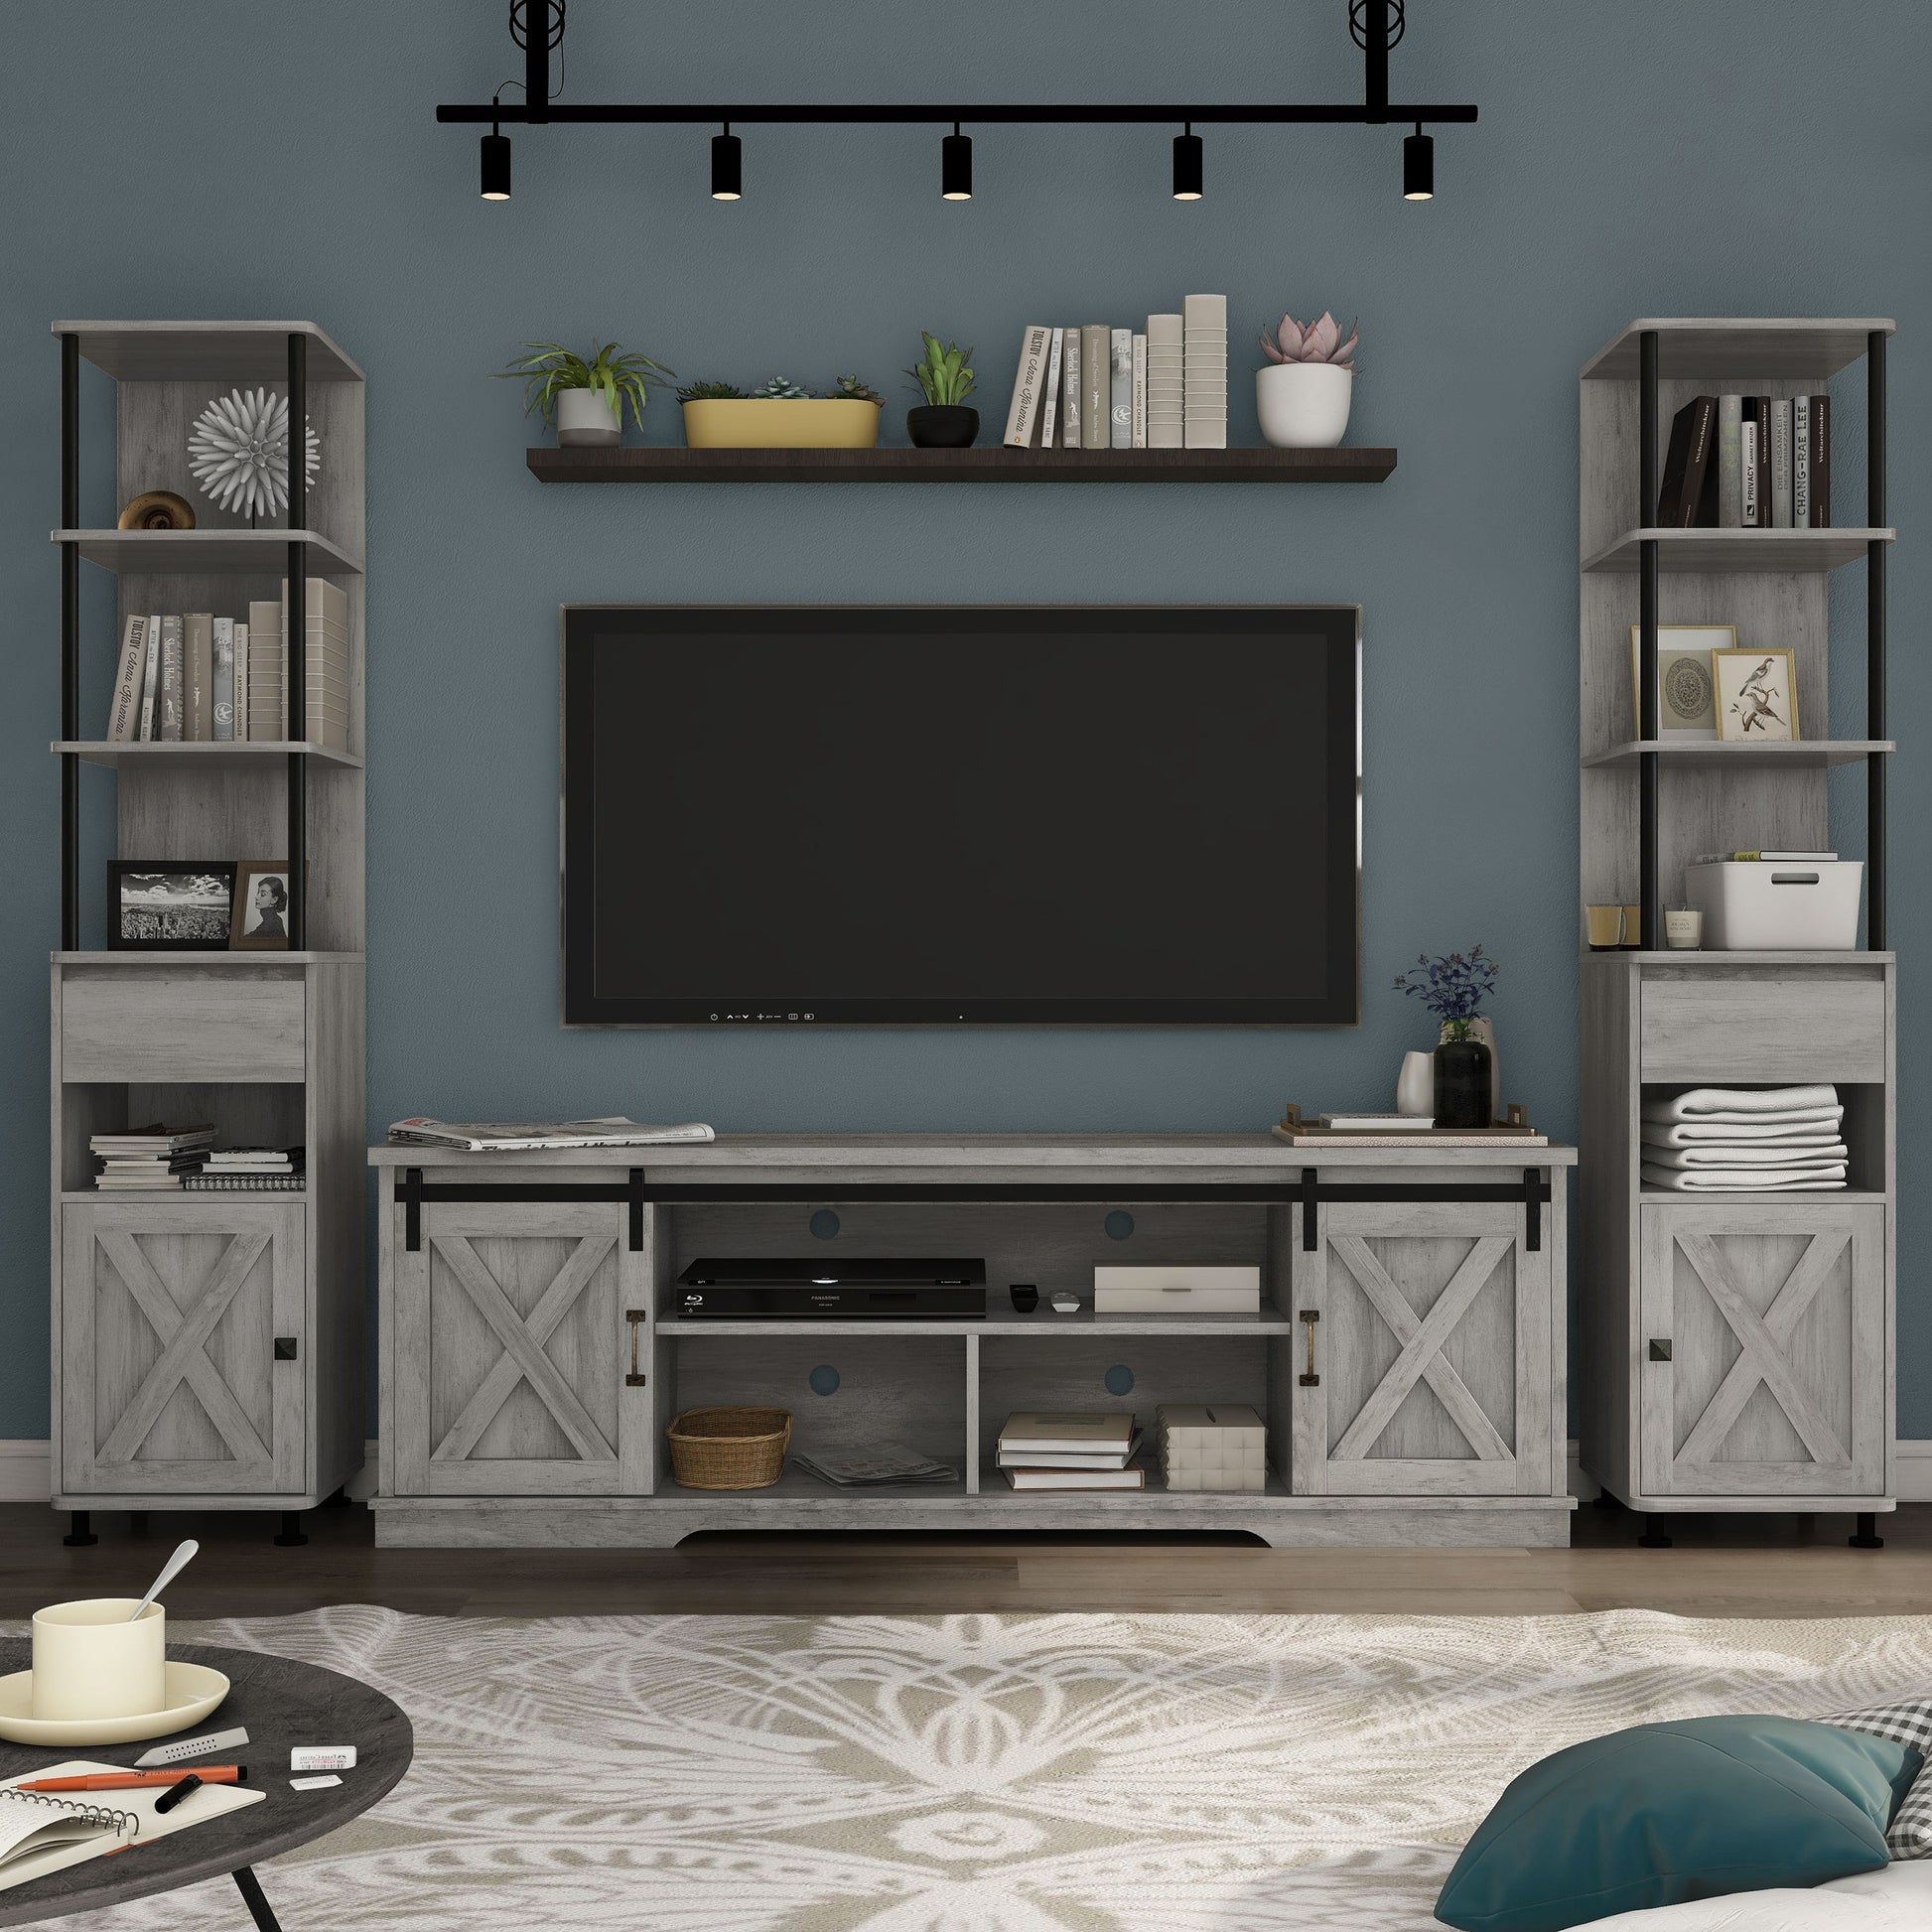 Front facing three-piece rustic vintage gray oak TV stand and pier entertainment set in a living room with accessories